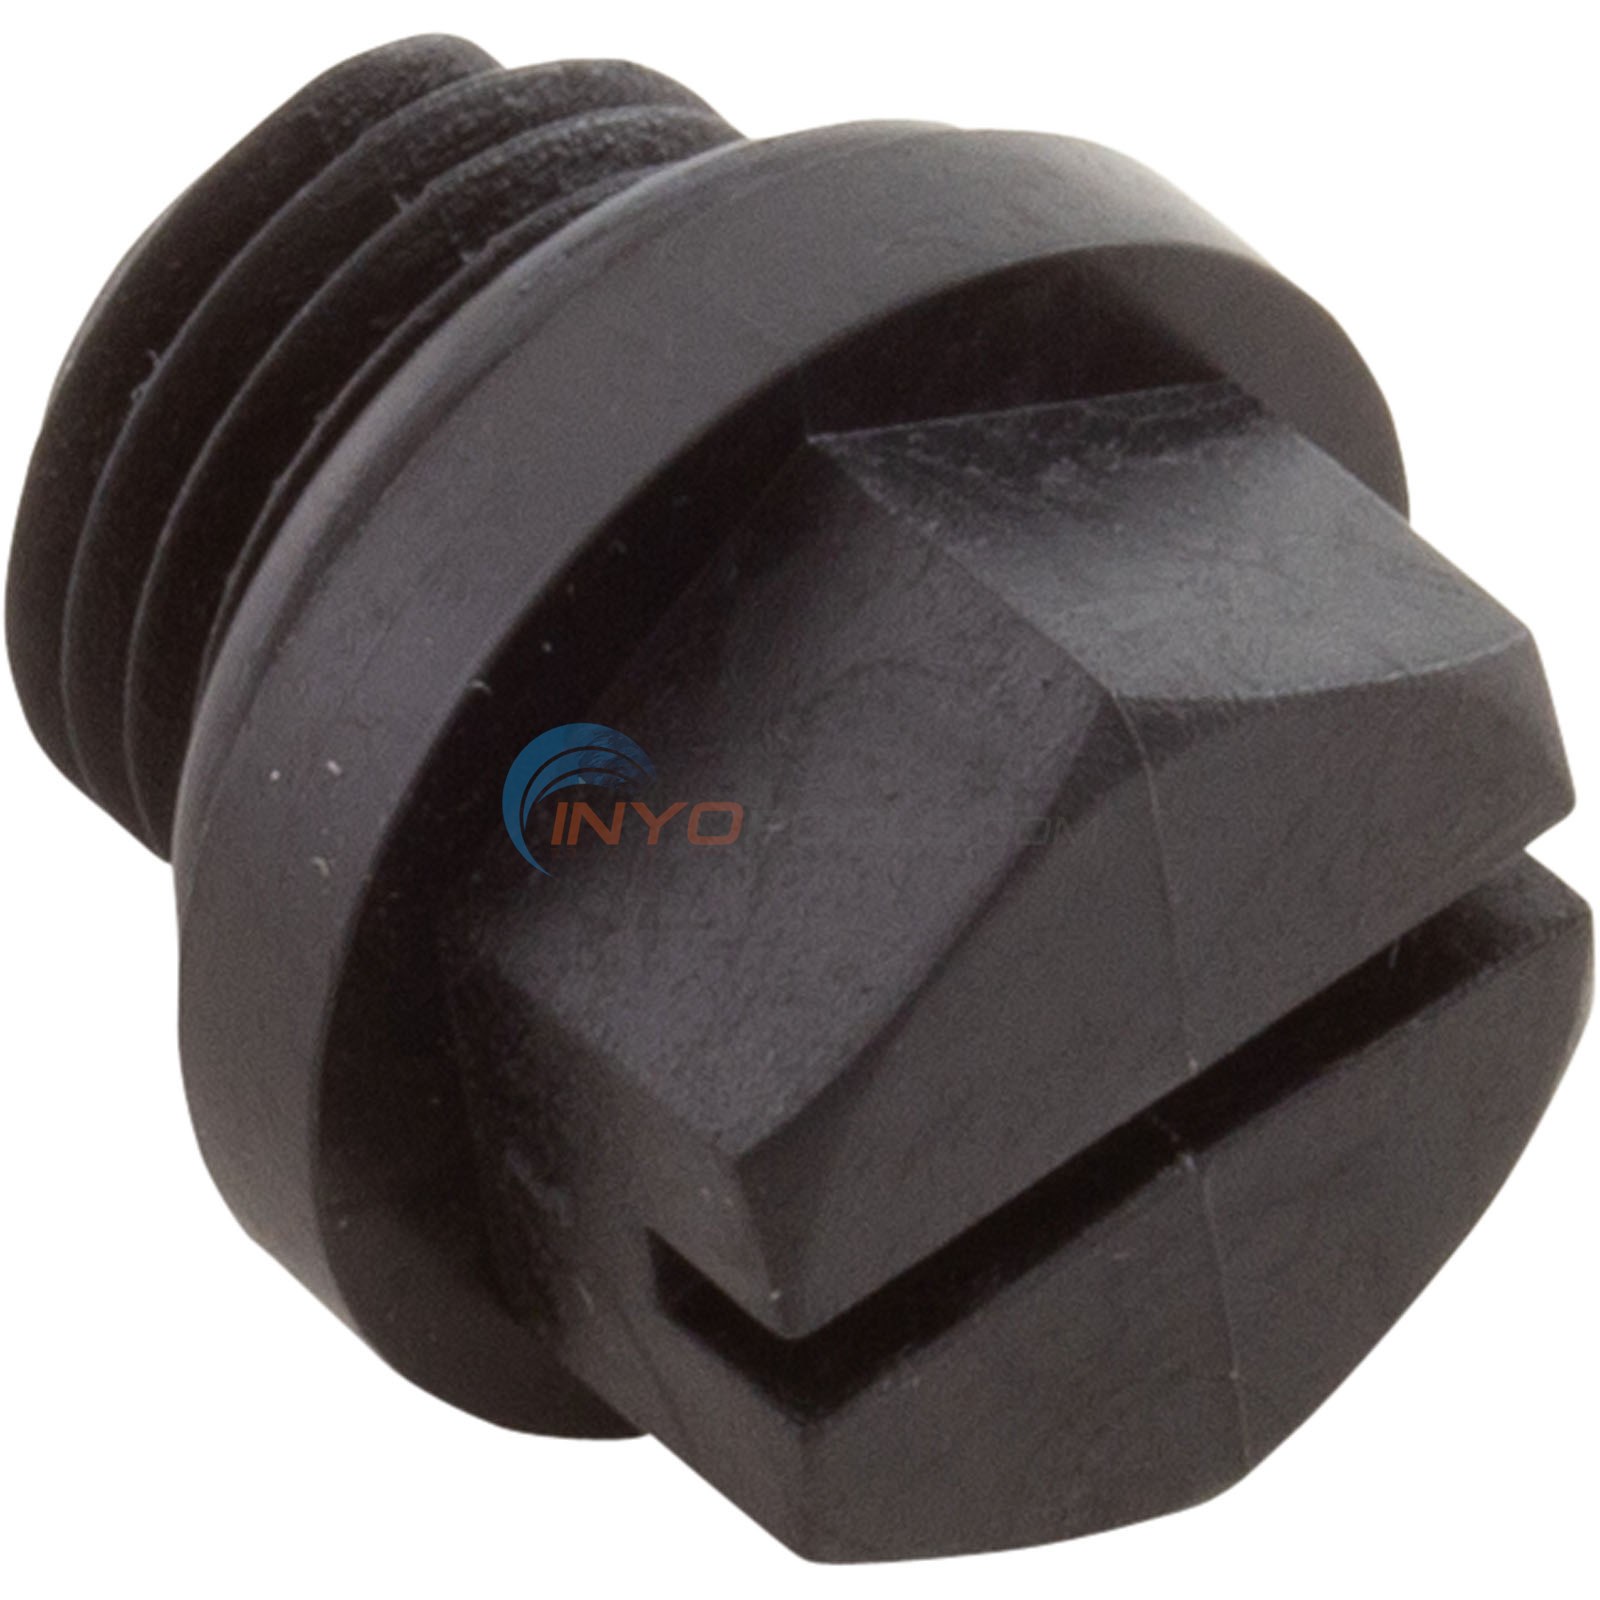 New Hayward SPX1700FG Pipe Plug with Gasket Replacement for Select Hayward Pumps 